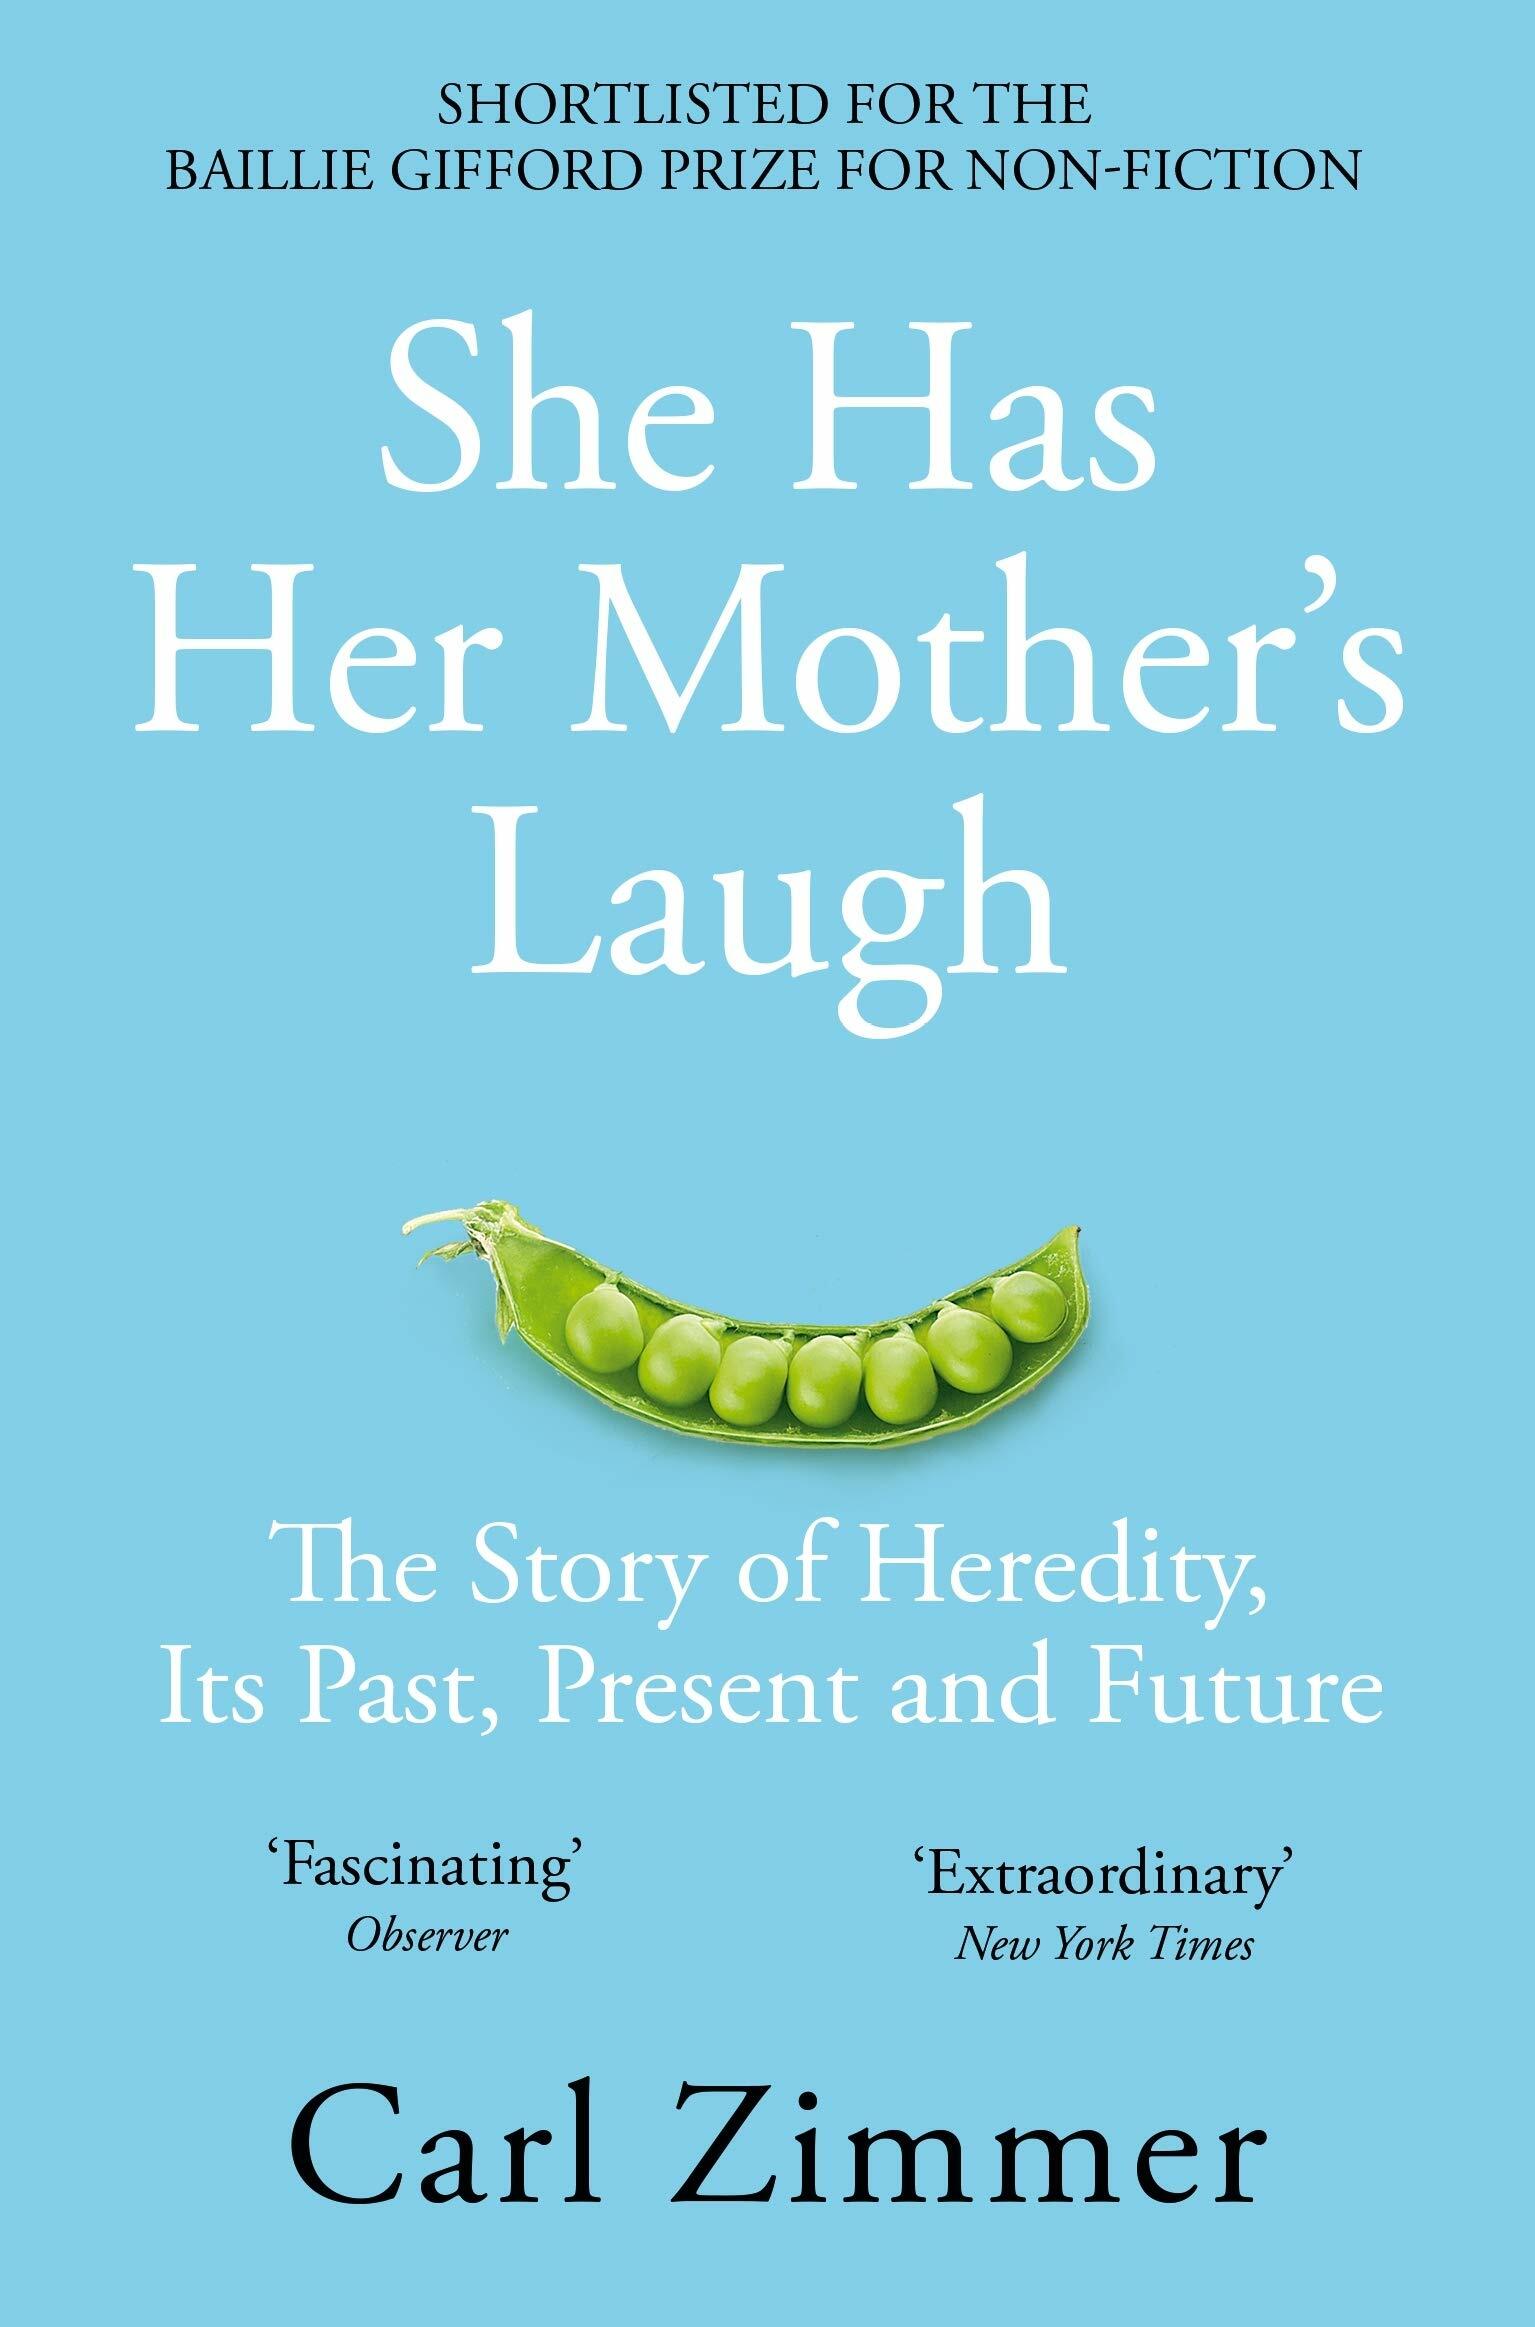 She Has Her Mothers Laugh : The Story of Heredity, Its Past, Present and Future (Paperback)